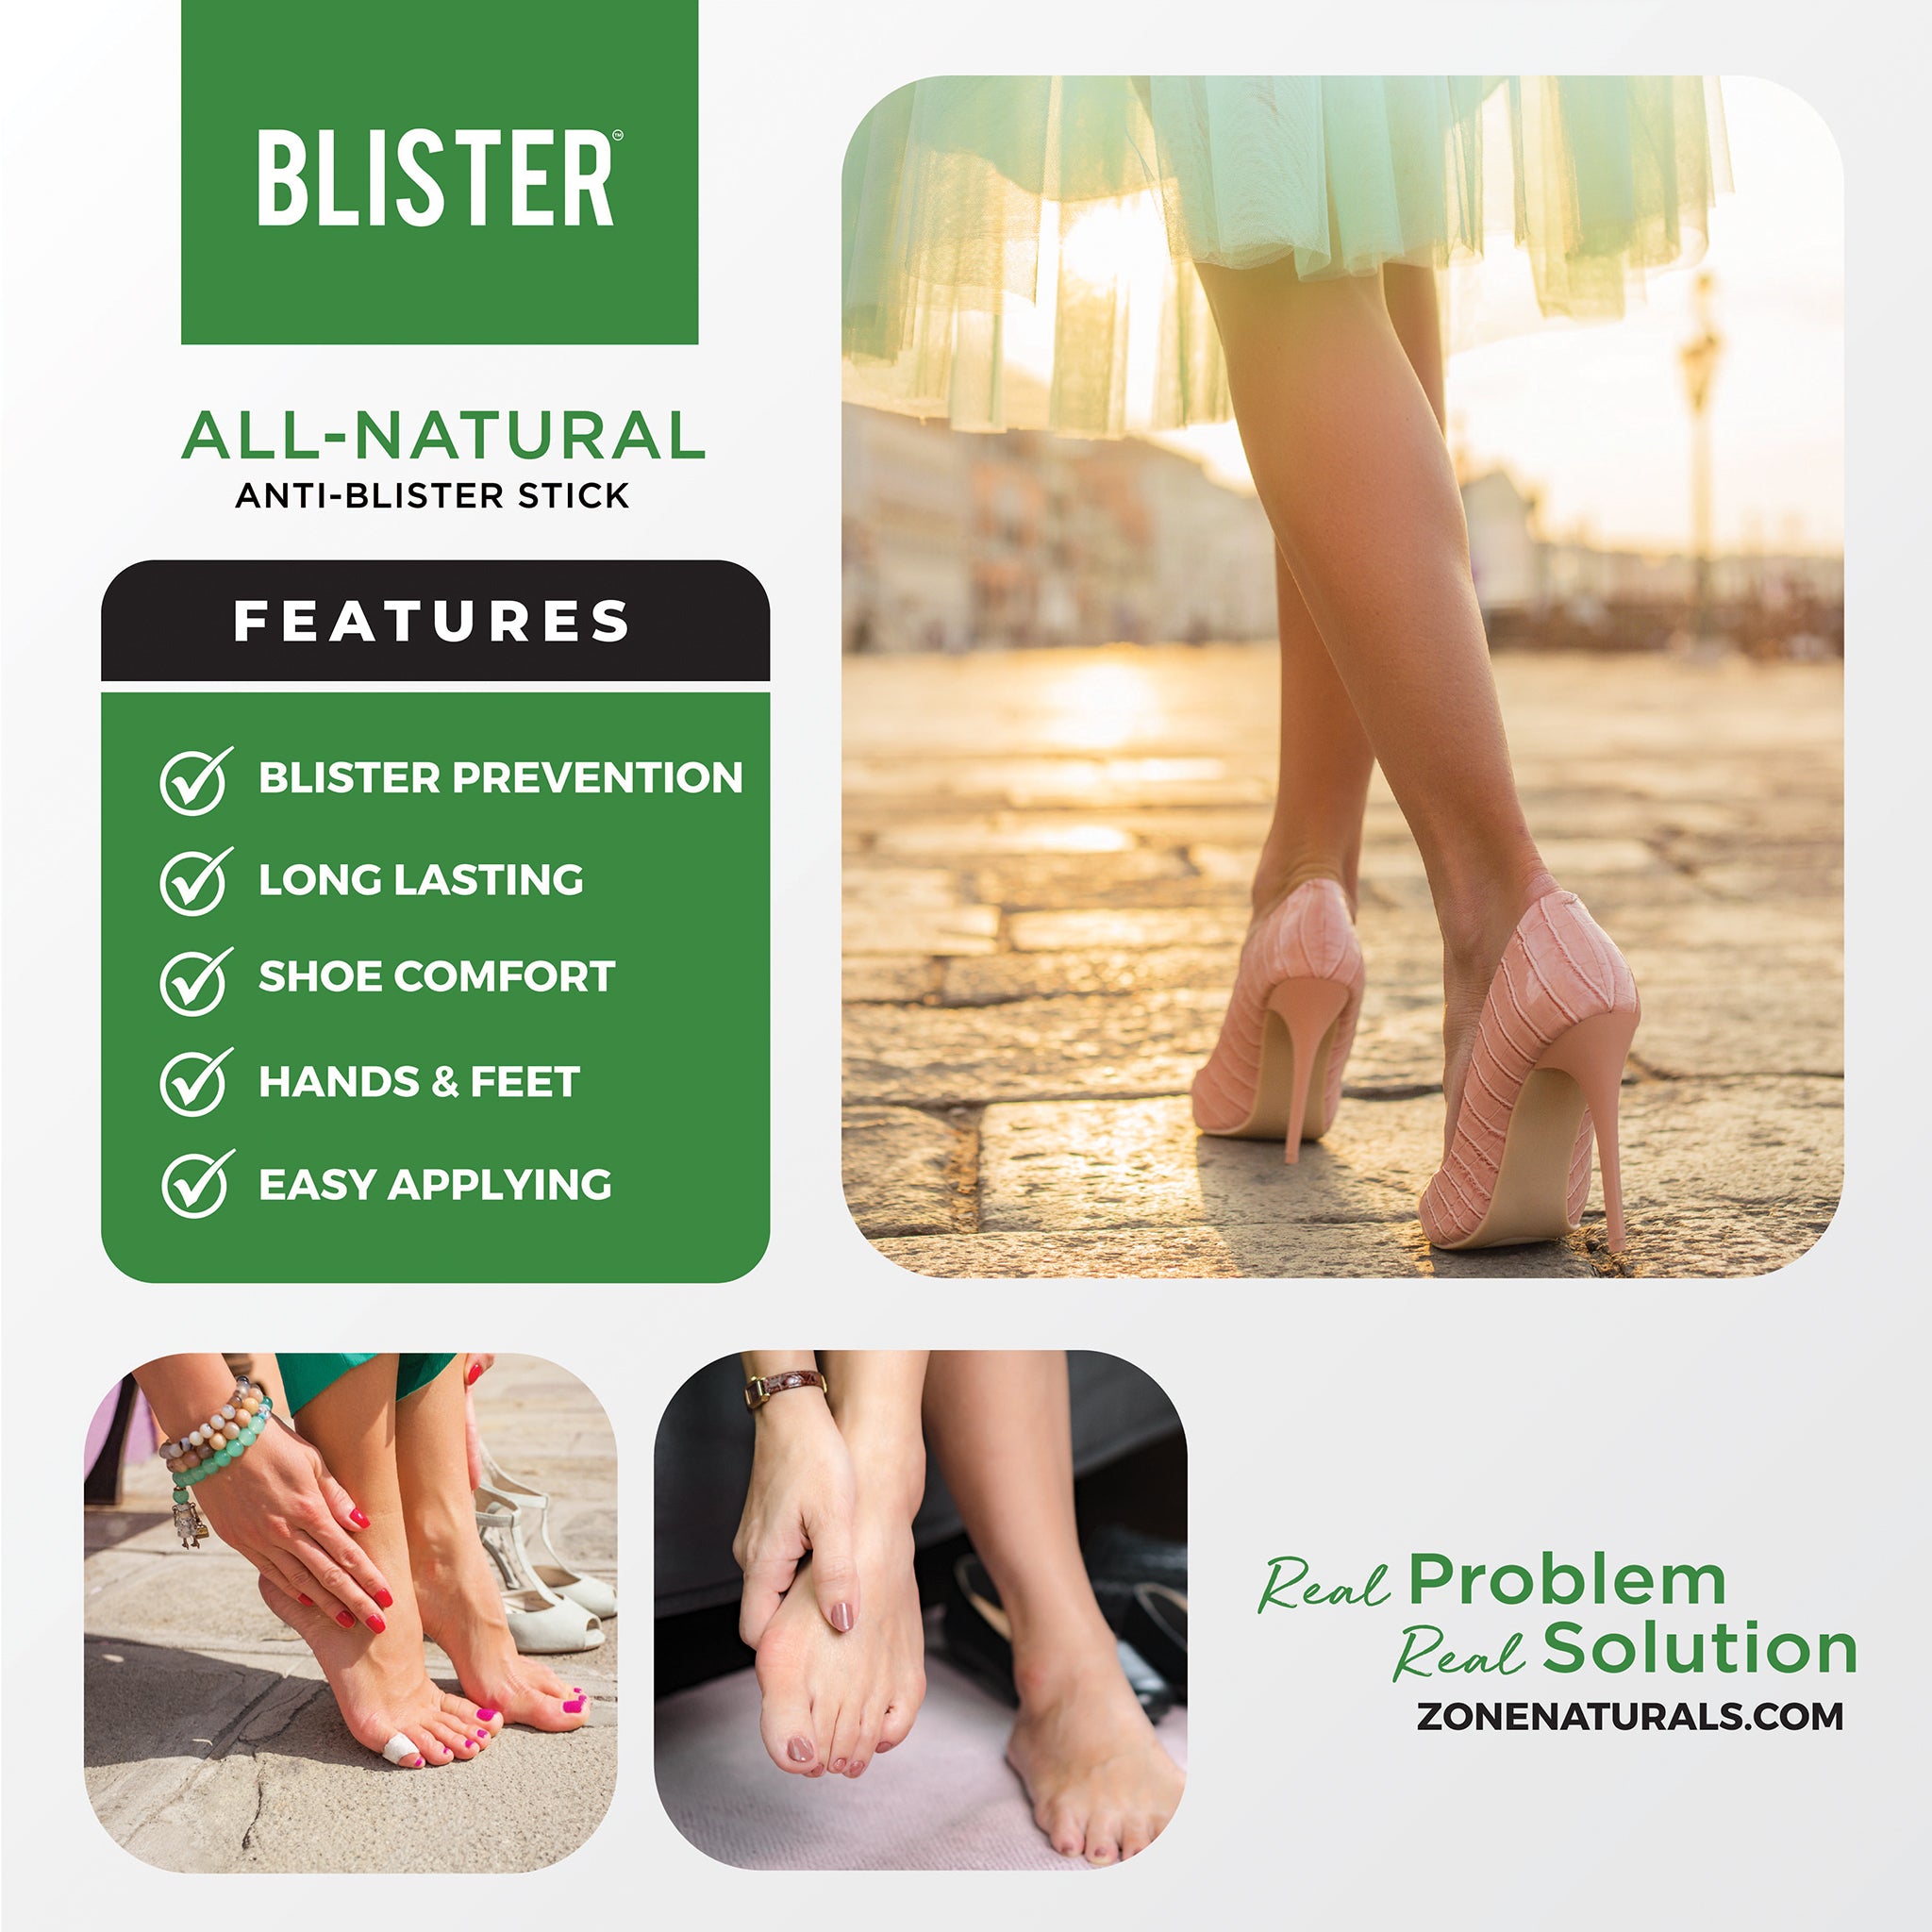 Blister Prevention and Relief - All-Natural Anti-Friction Stick